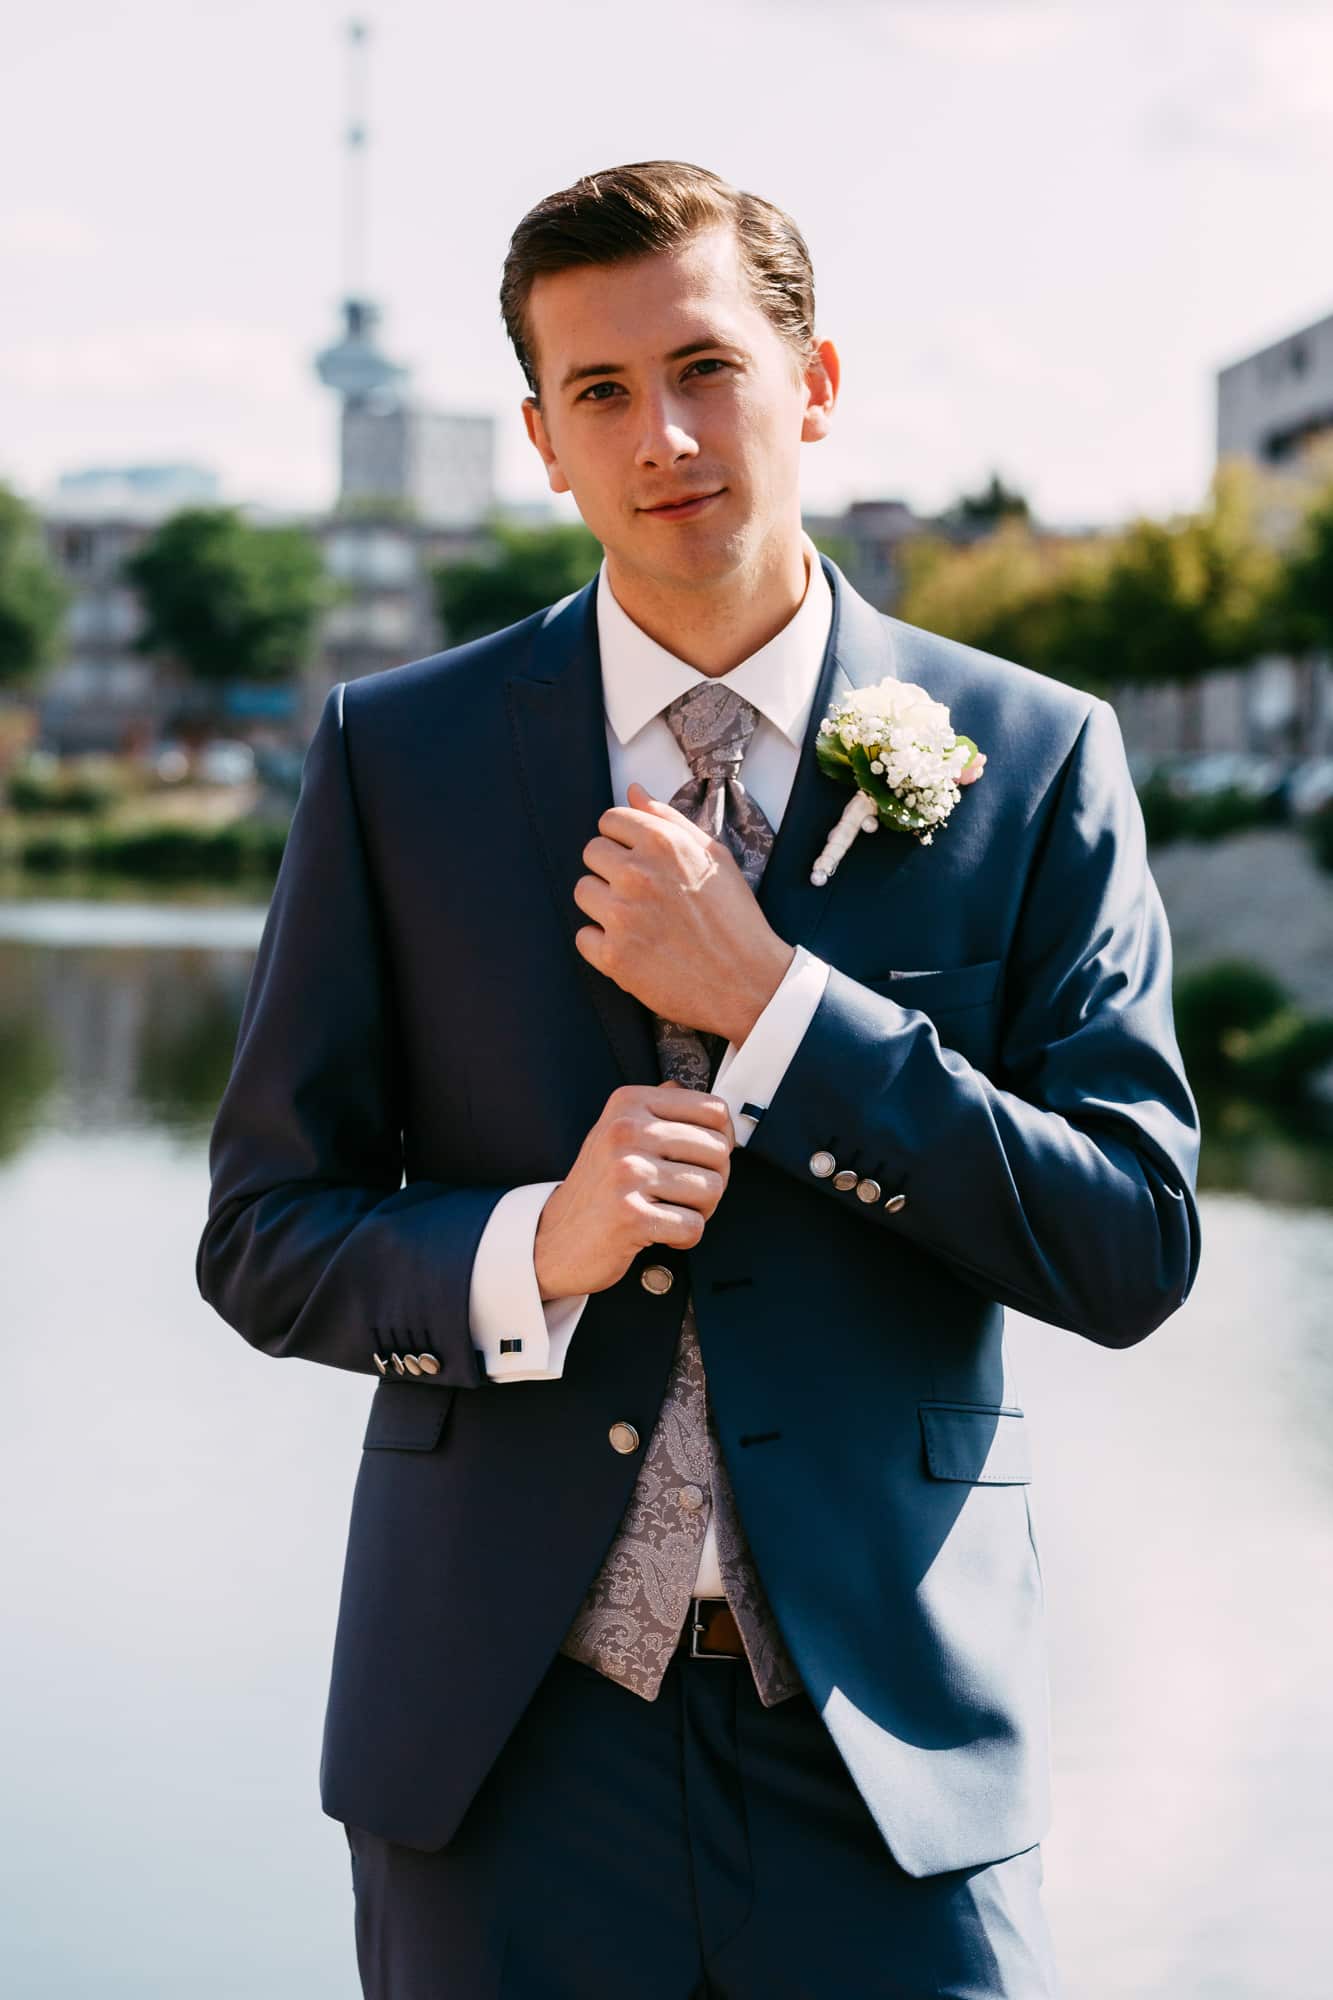 A man in a blue suit poses for a photo at a wedding.